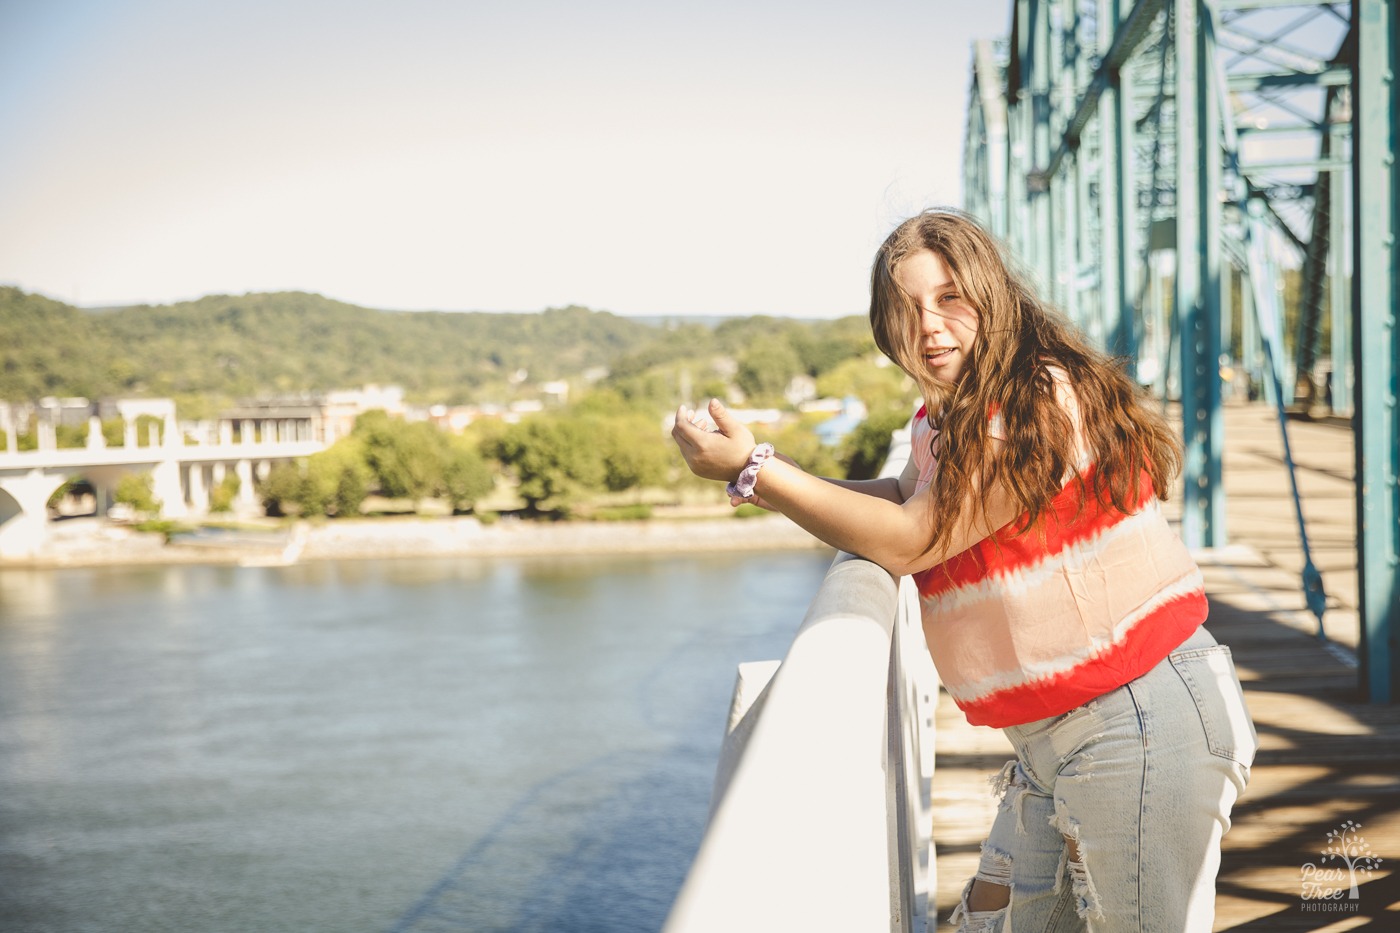 Girl with long brown hair blowing in her face as she leans on Chattanooga bridge